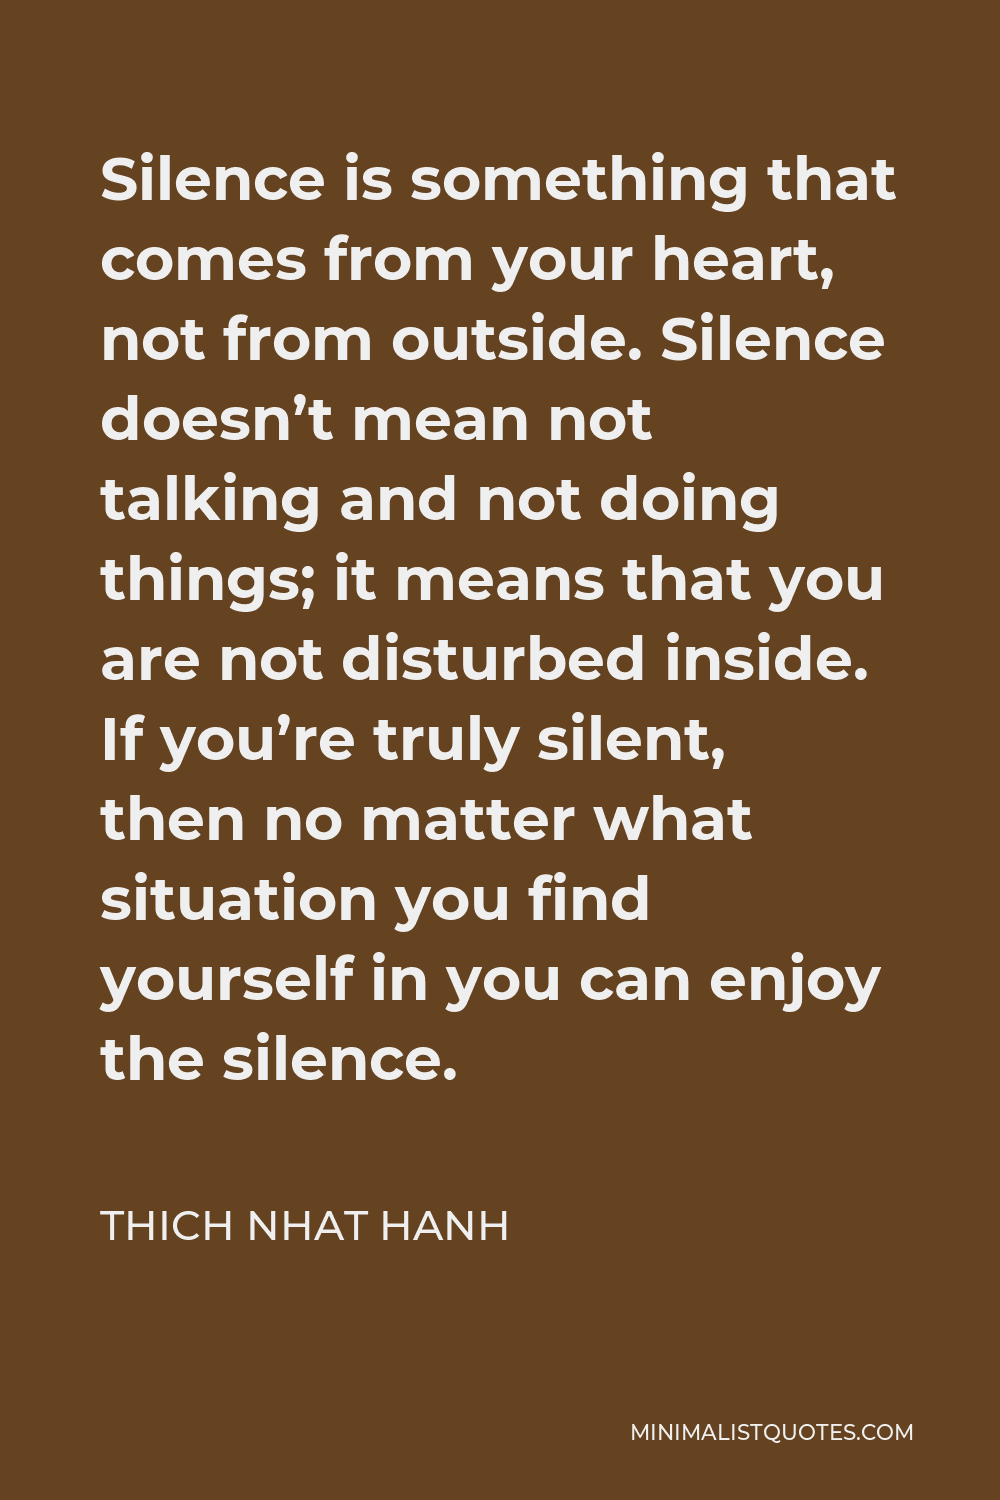 Thich Nhat Hanh Quote - Silence is something that comes from your heart, not from outside. Silence doesn’t mean not talking and not doing things; it means that you are not disturbed inside. If you’re truly silent, then no matter what situation you find yourself in you can enjoy the silence.